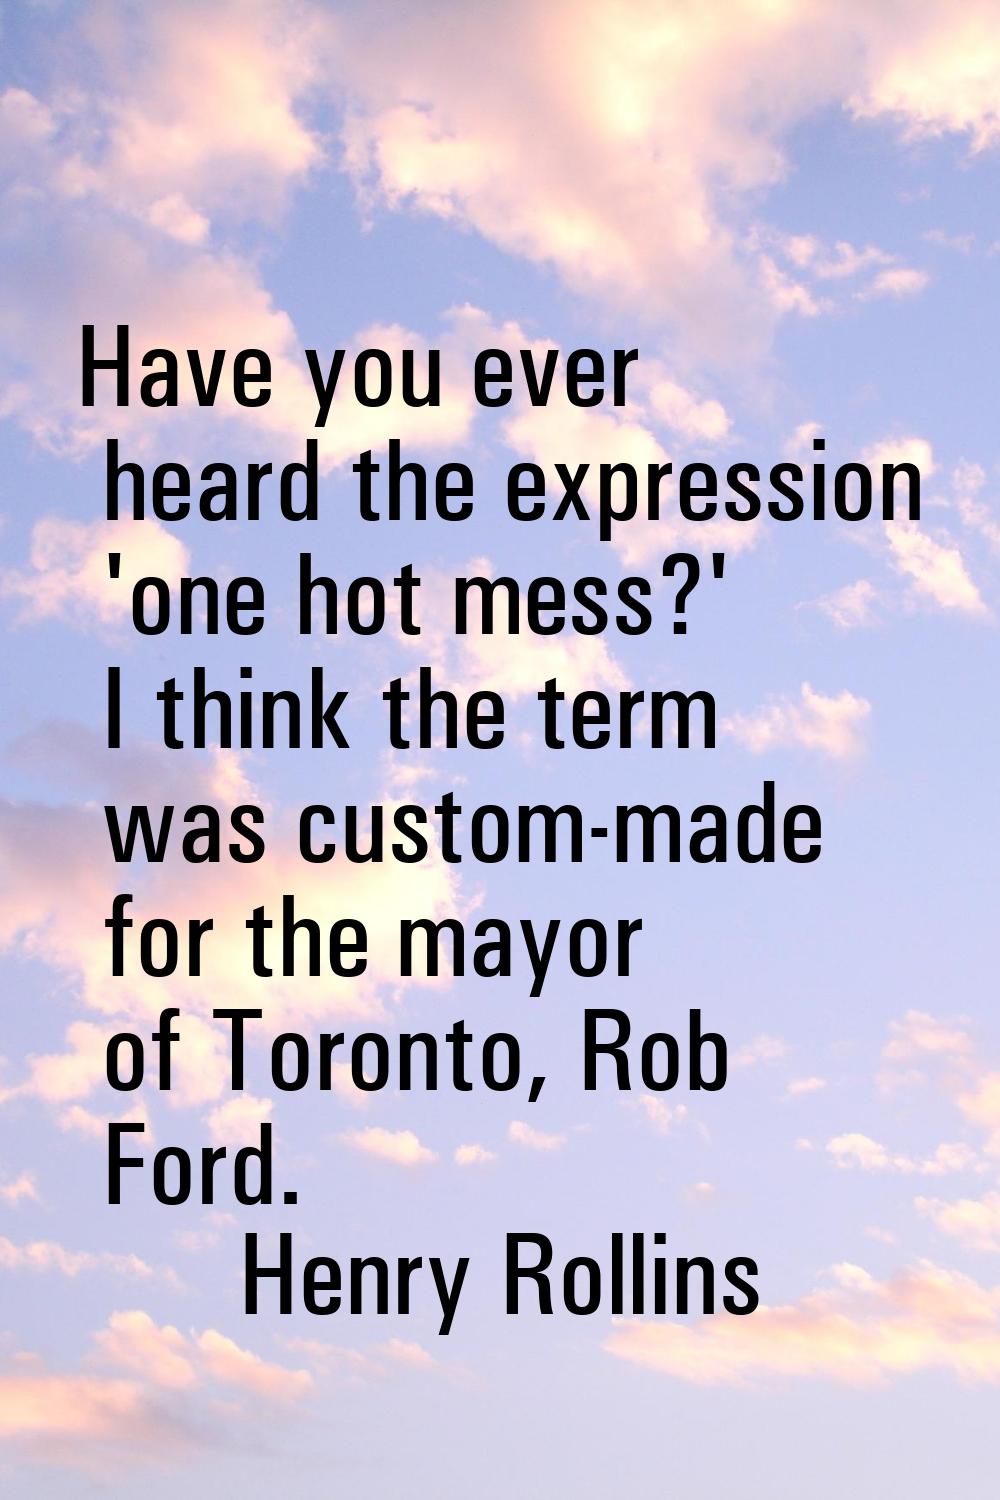 Have you ever heard the expression 'one hot mess?' I think the term was custom-made for the mayor o